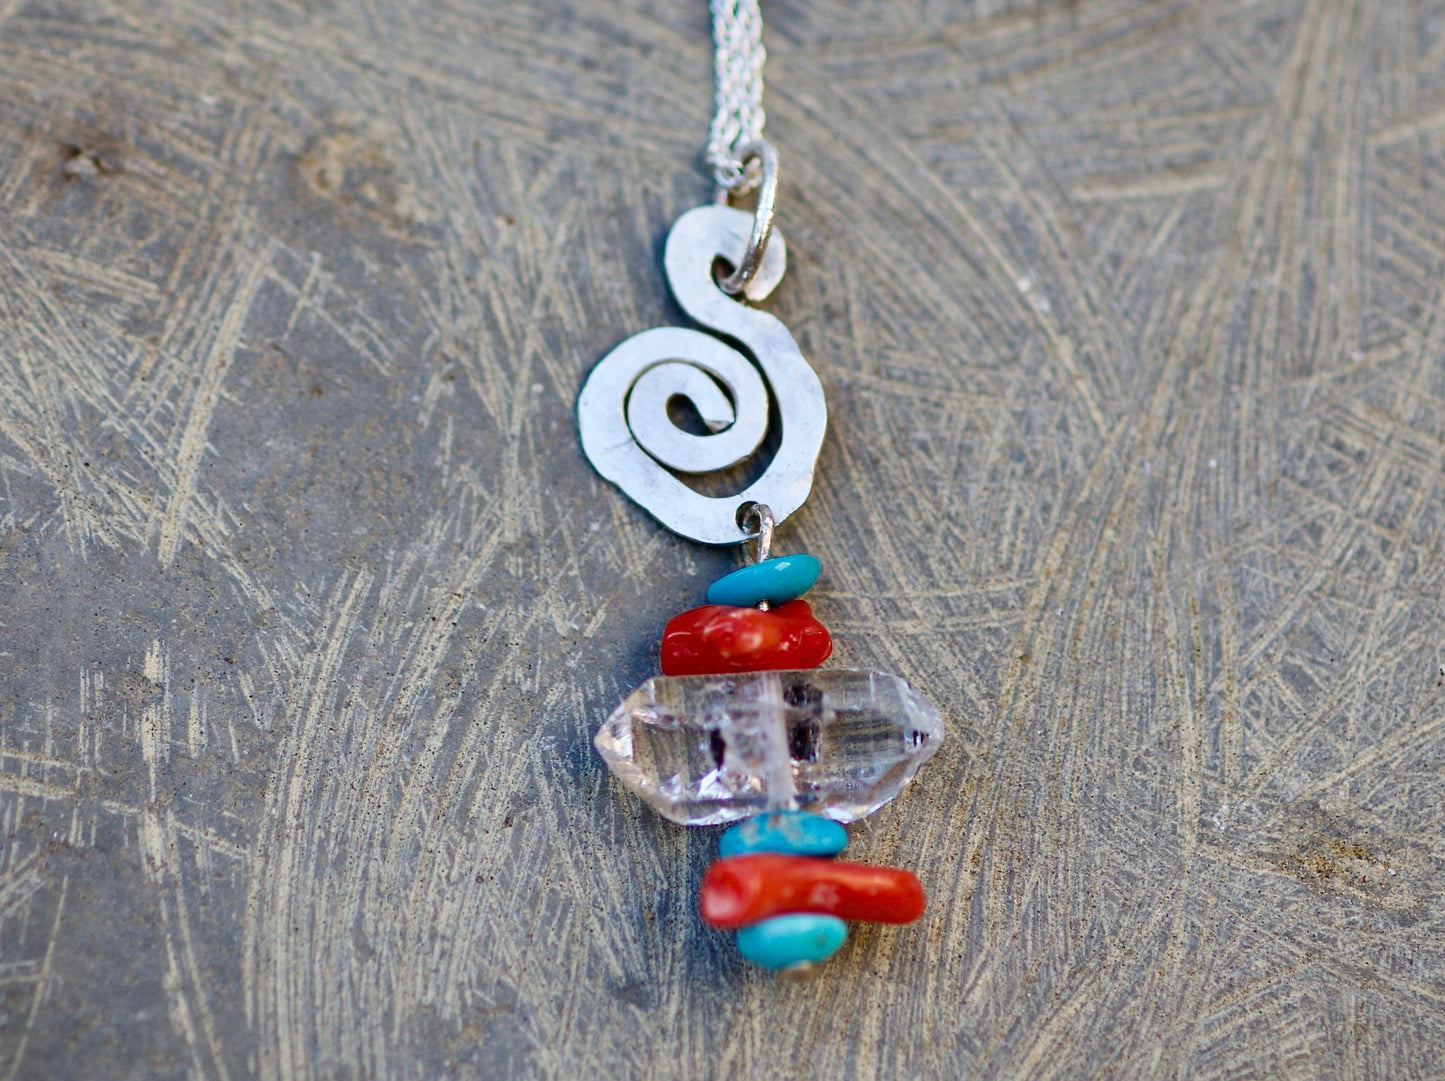 Tibetan Quartz DT Crystal, Turquoise, Red Coral, and Sterling Silver Pendant Necklace